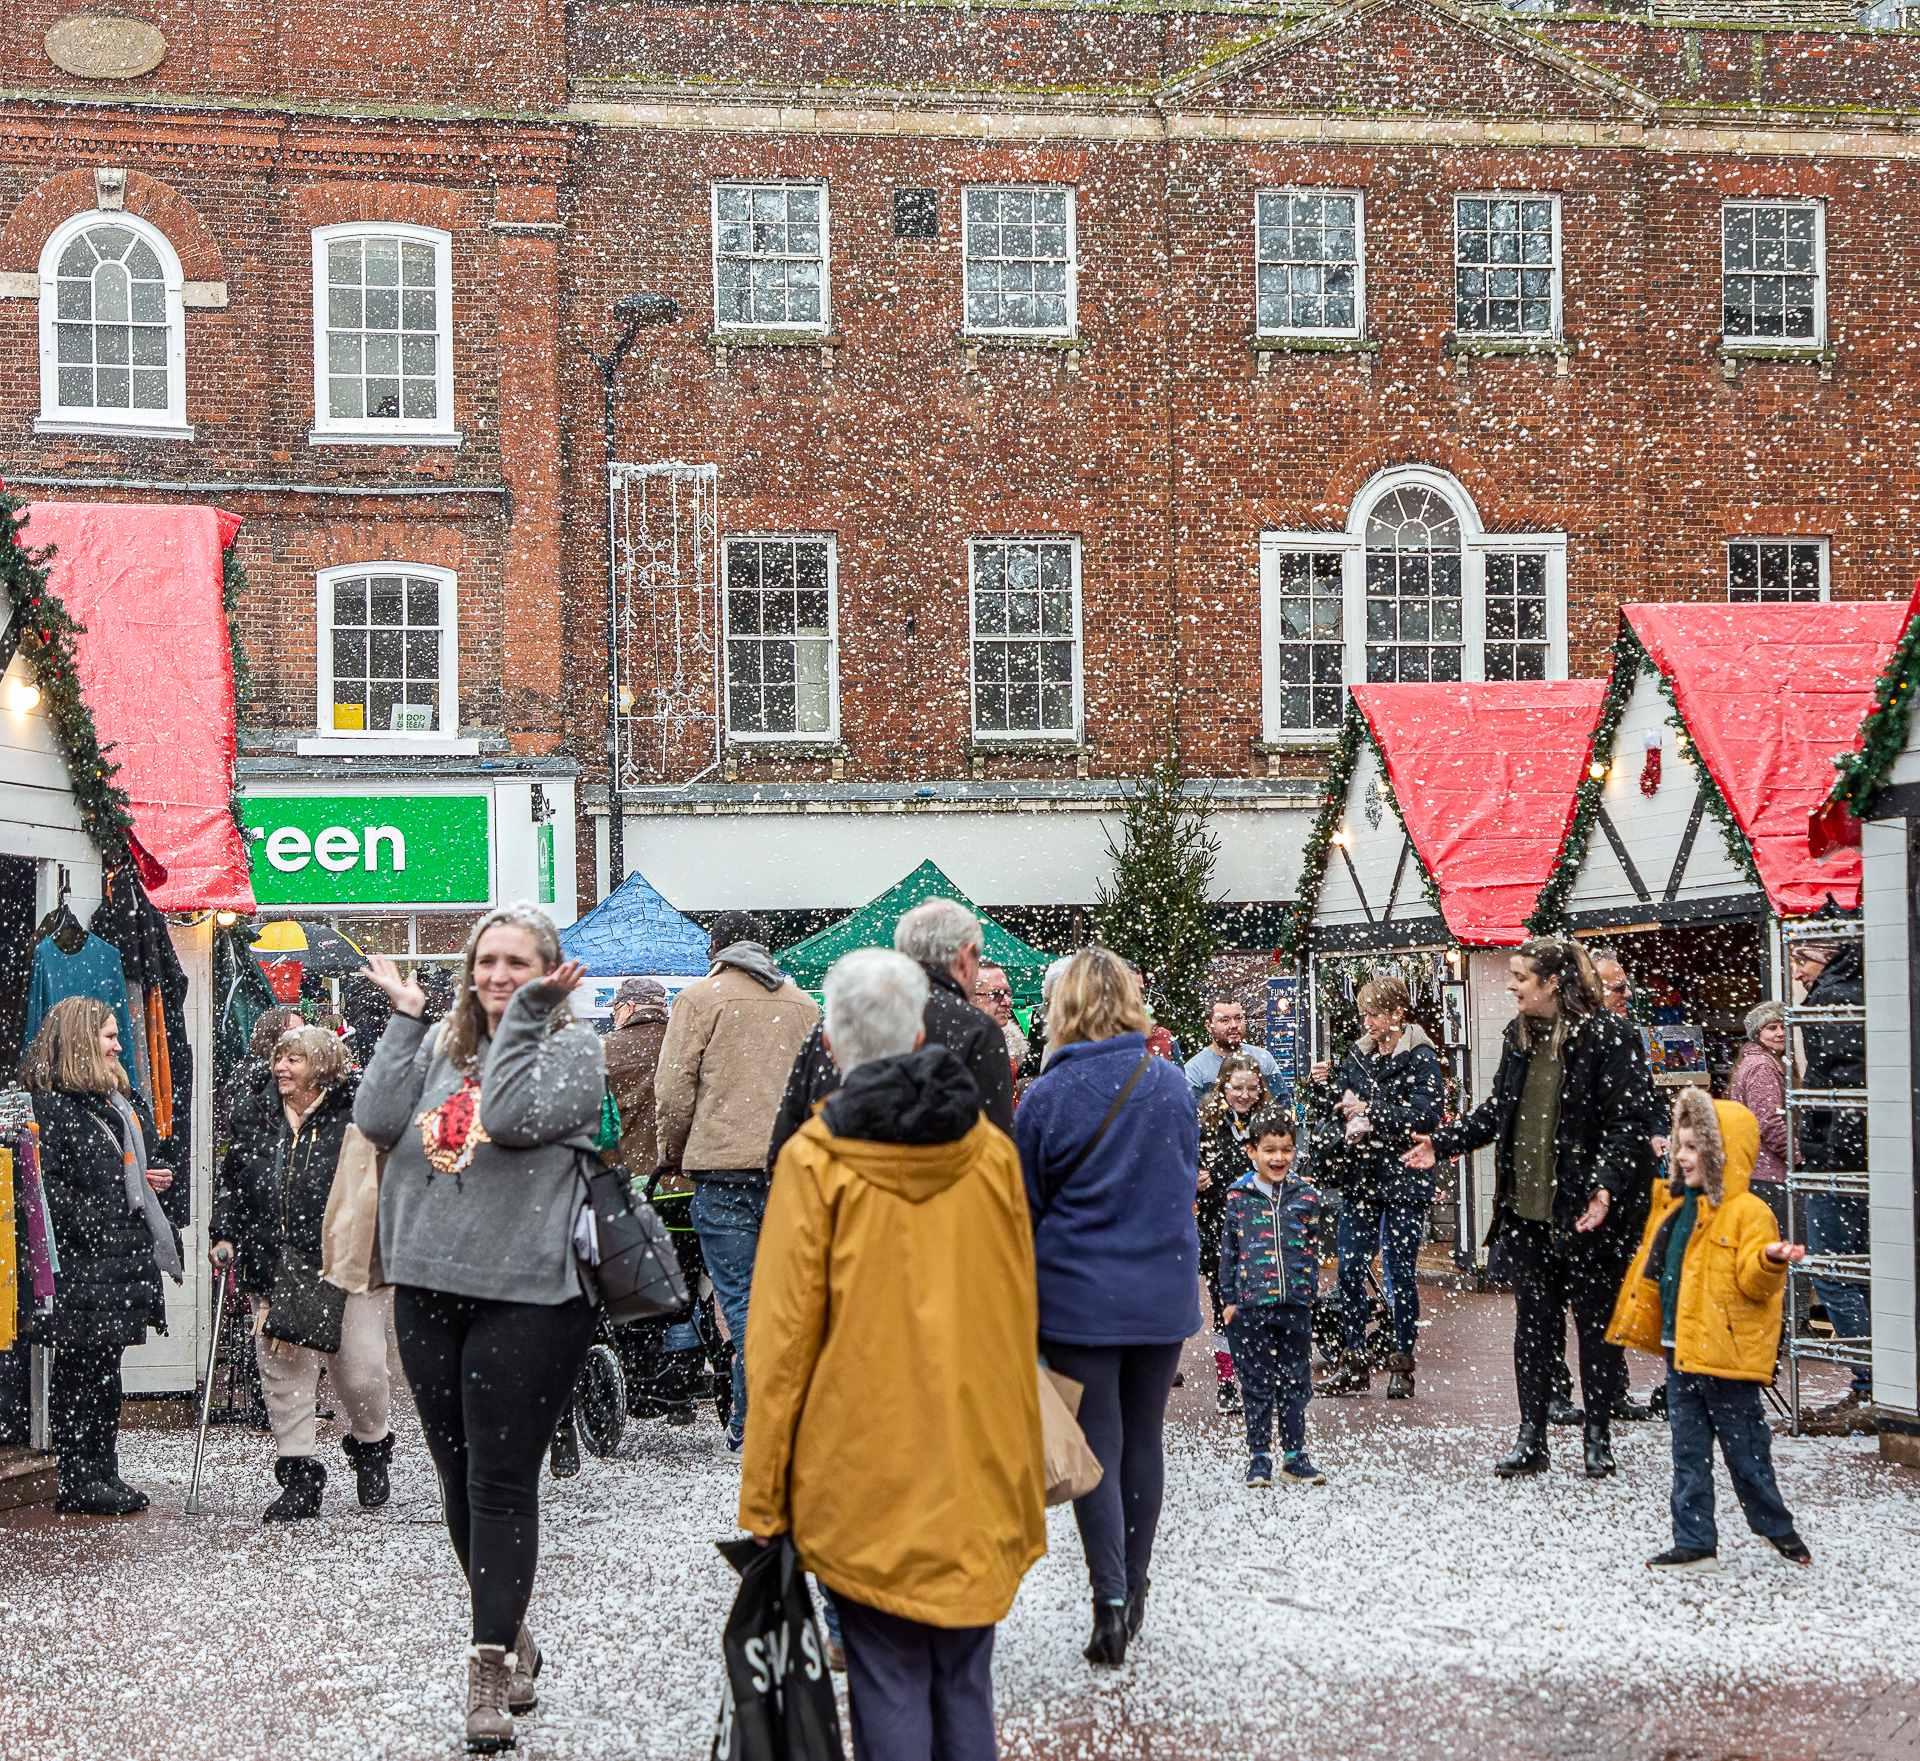 A crowd of shoppers on Huntingdon Market Square, walking between Christmas wooden chalets with red roofs. Gentle snow falls and some children are playing in the foam.